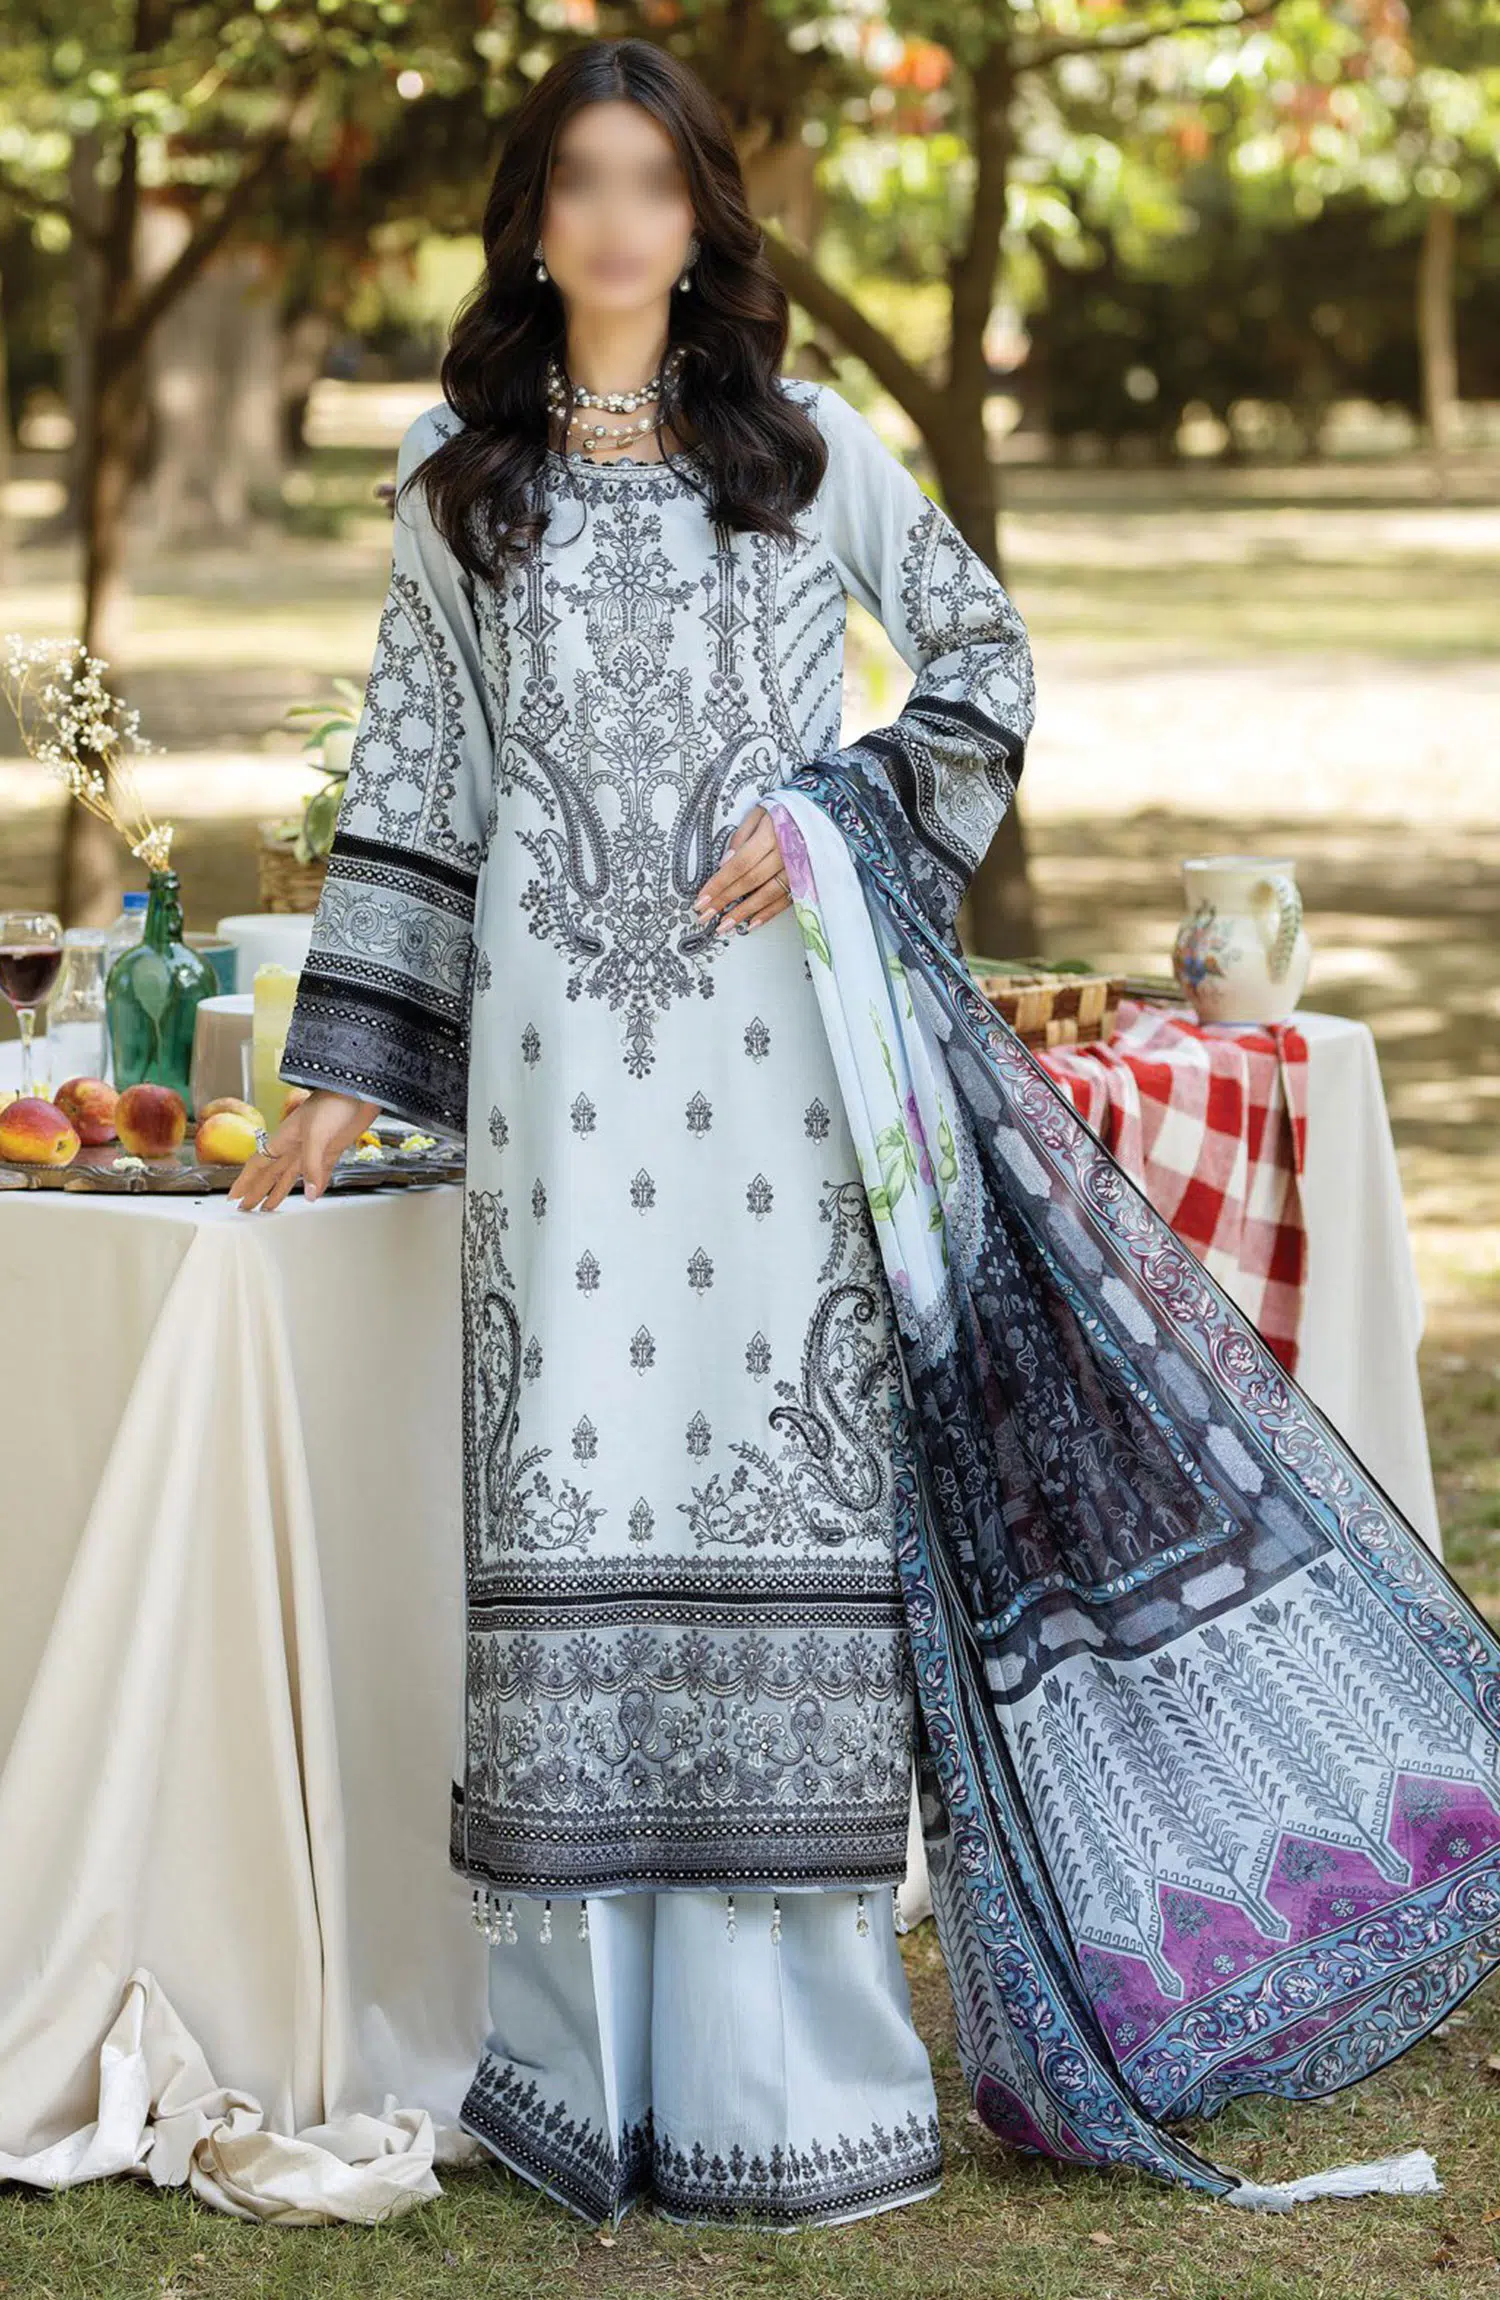 Jaan-E-Adaa Lawn Collection By Imrozia - IPL - 02 ROOH